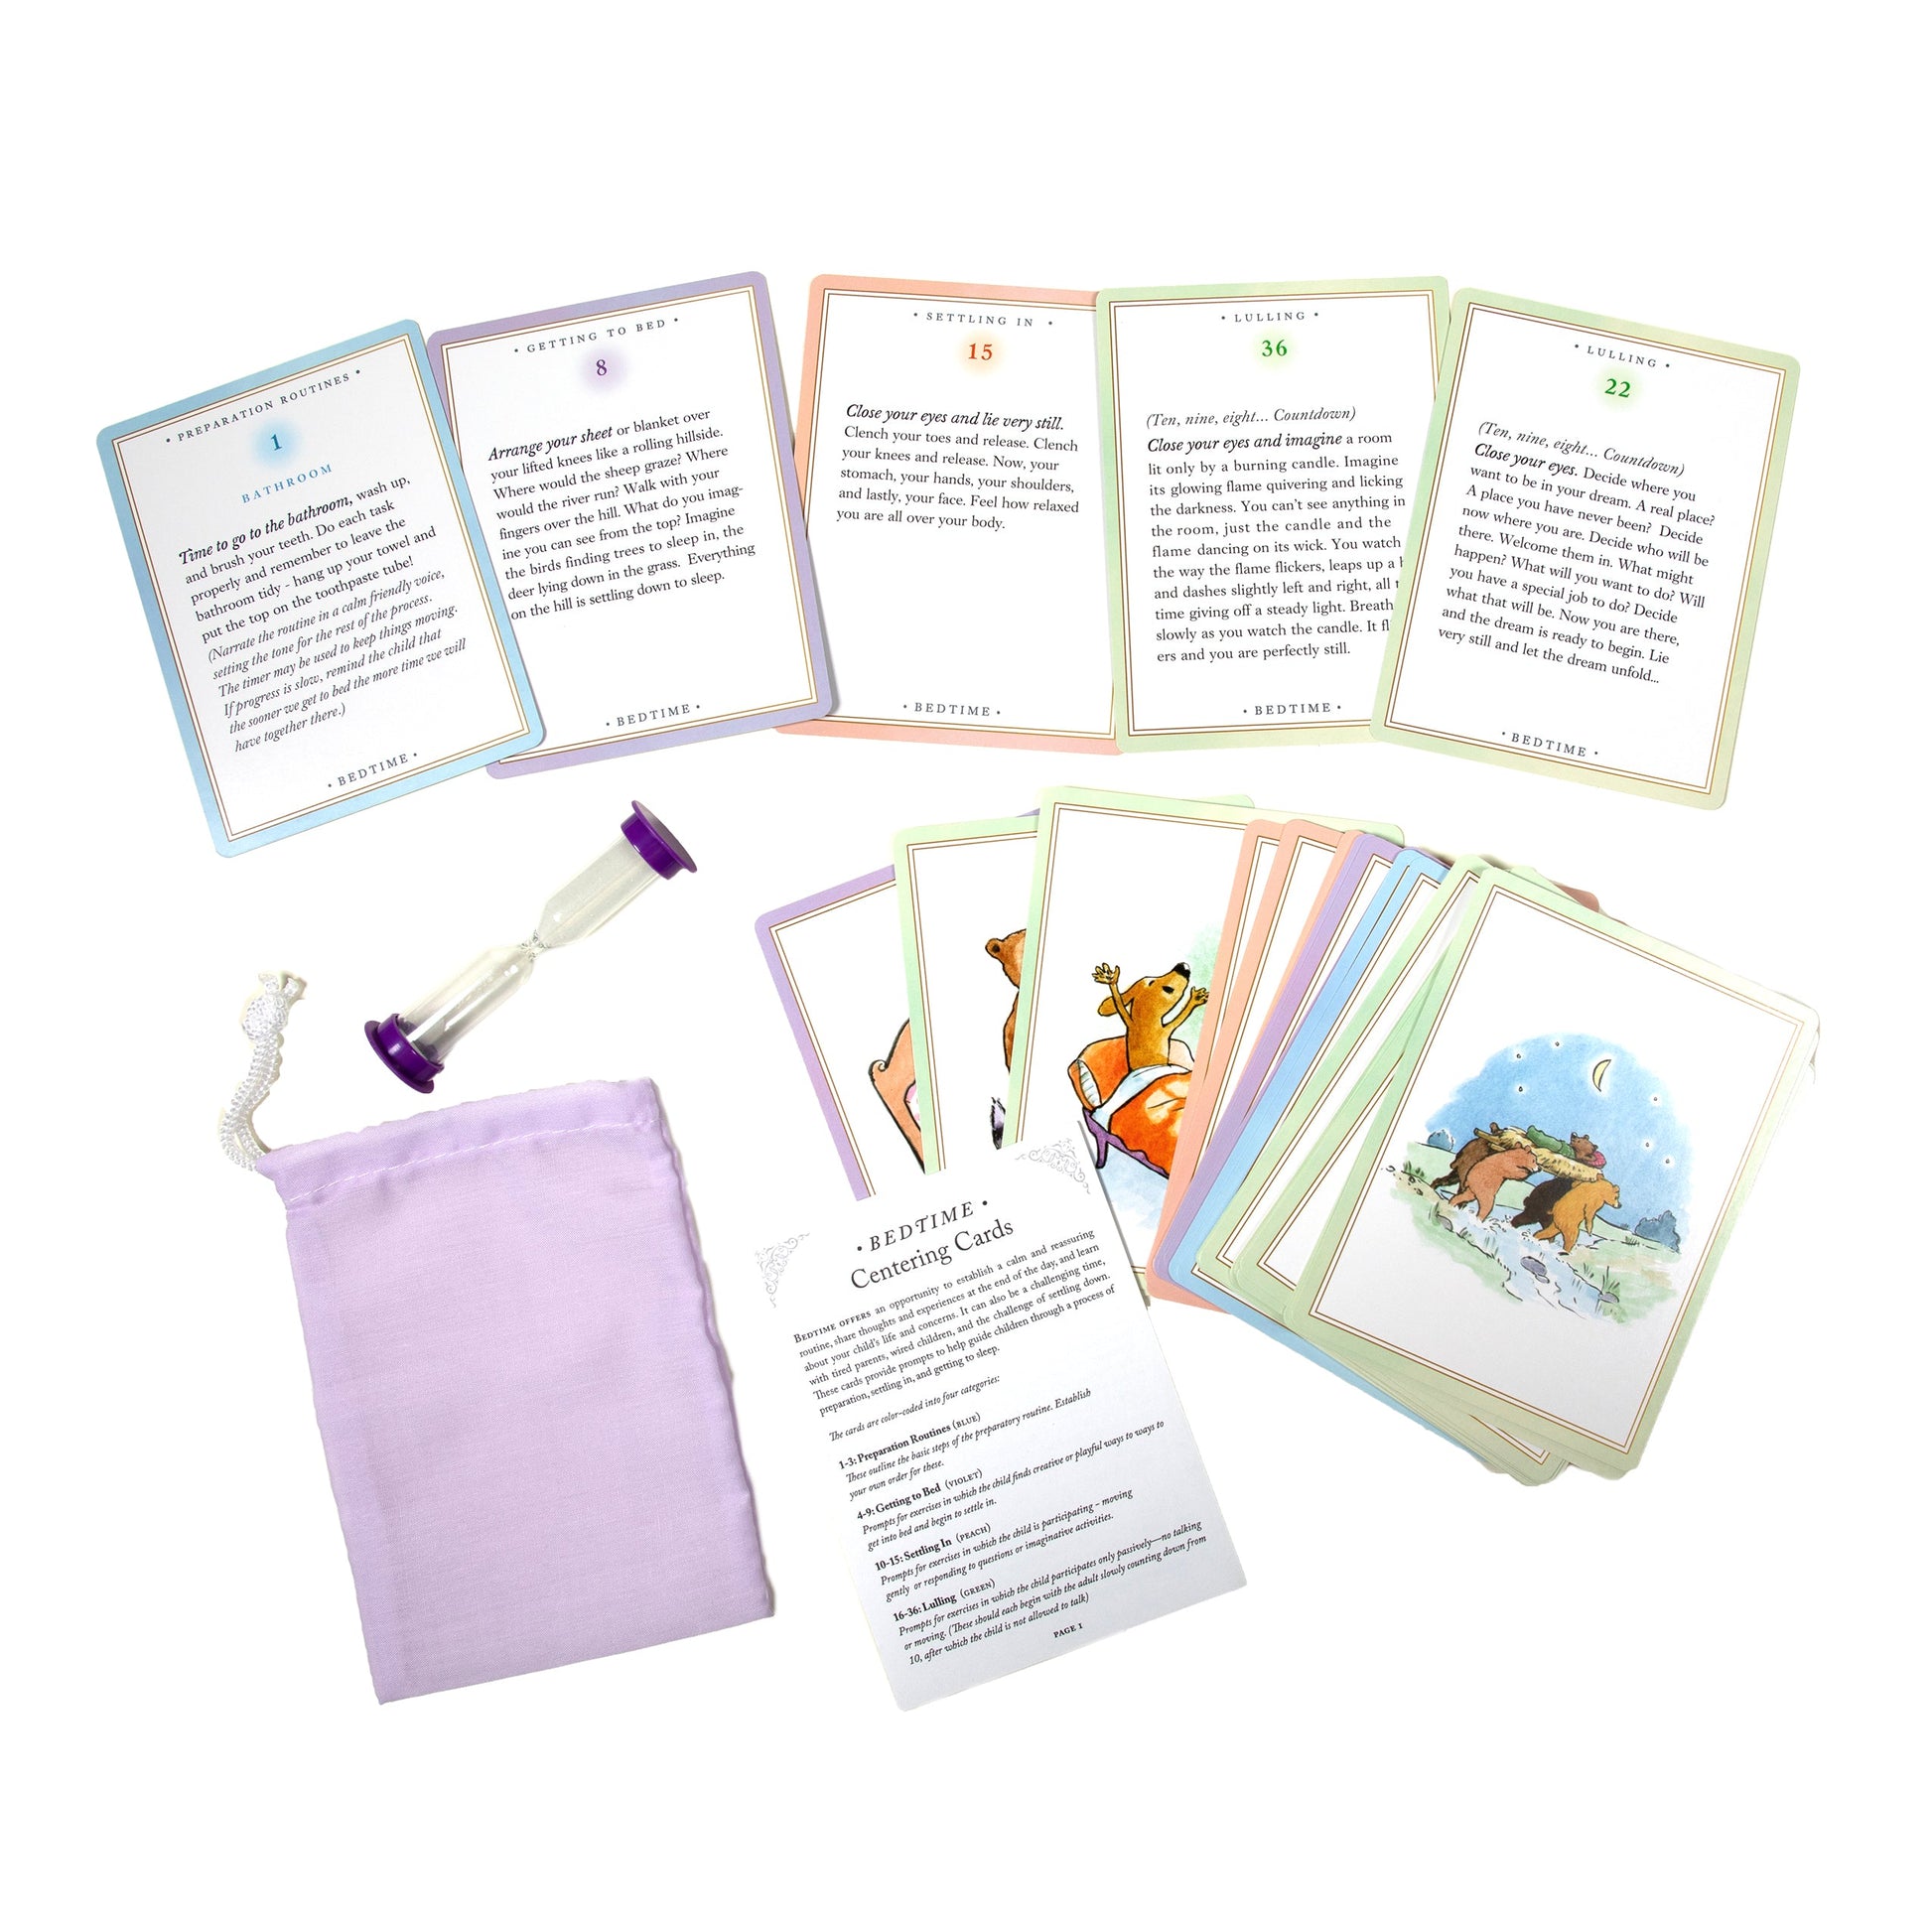 Bedtime Centering Calming Cards for Children of  All Ages by eeBoo | Gentle Parenting Skills | Special Needs Adaptable